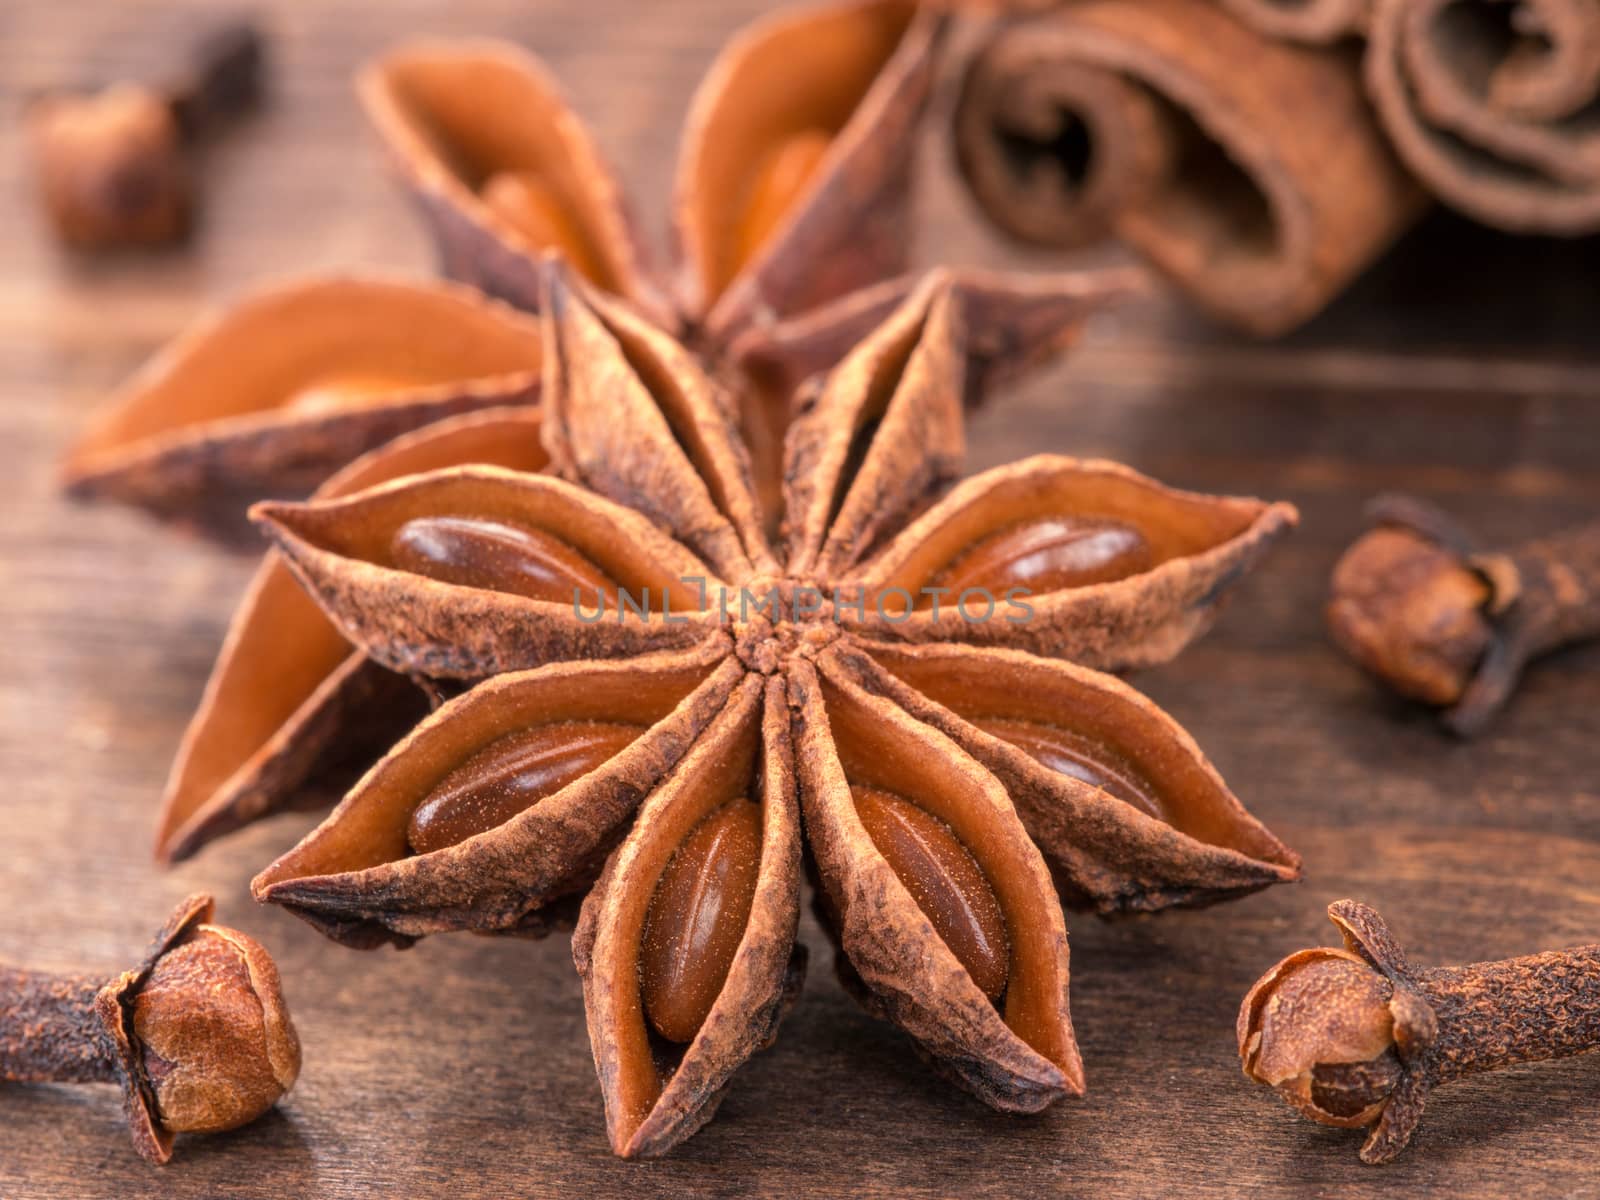 star anise on wooden background close up. Blurred clove and cinnamon sticks as background